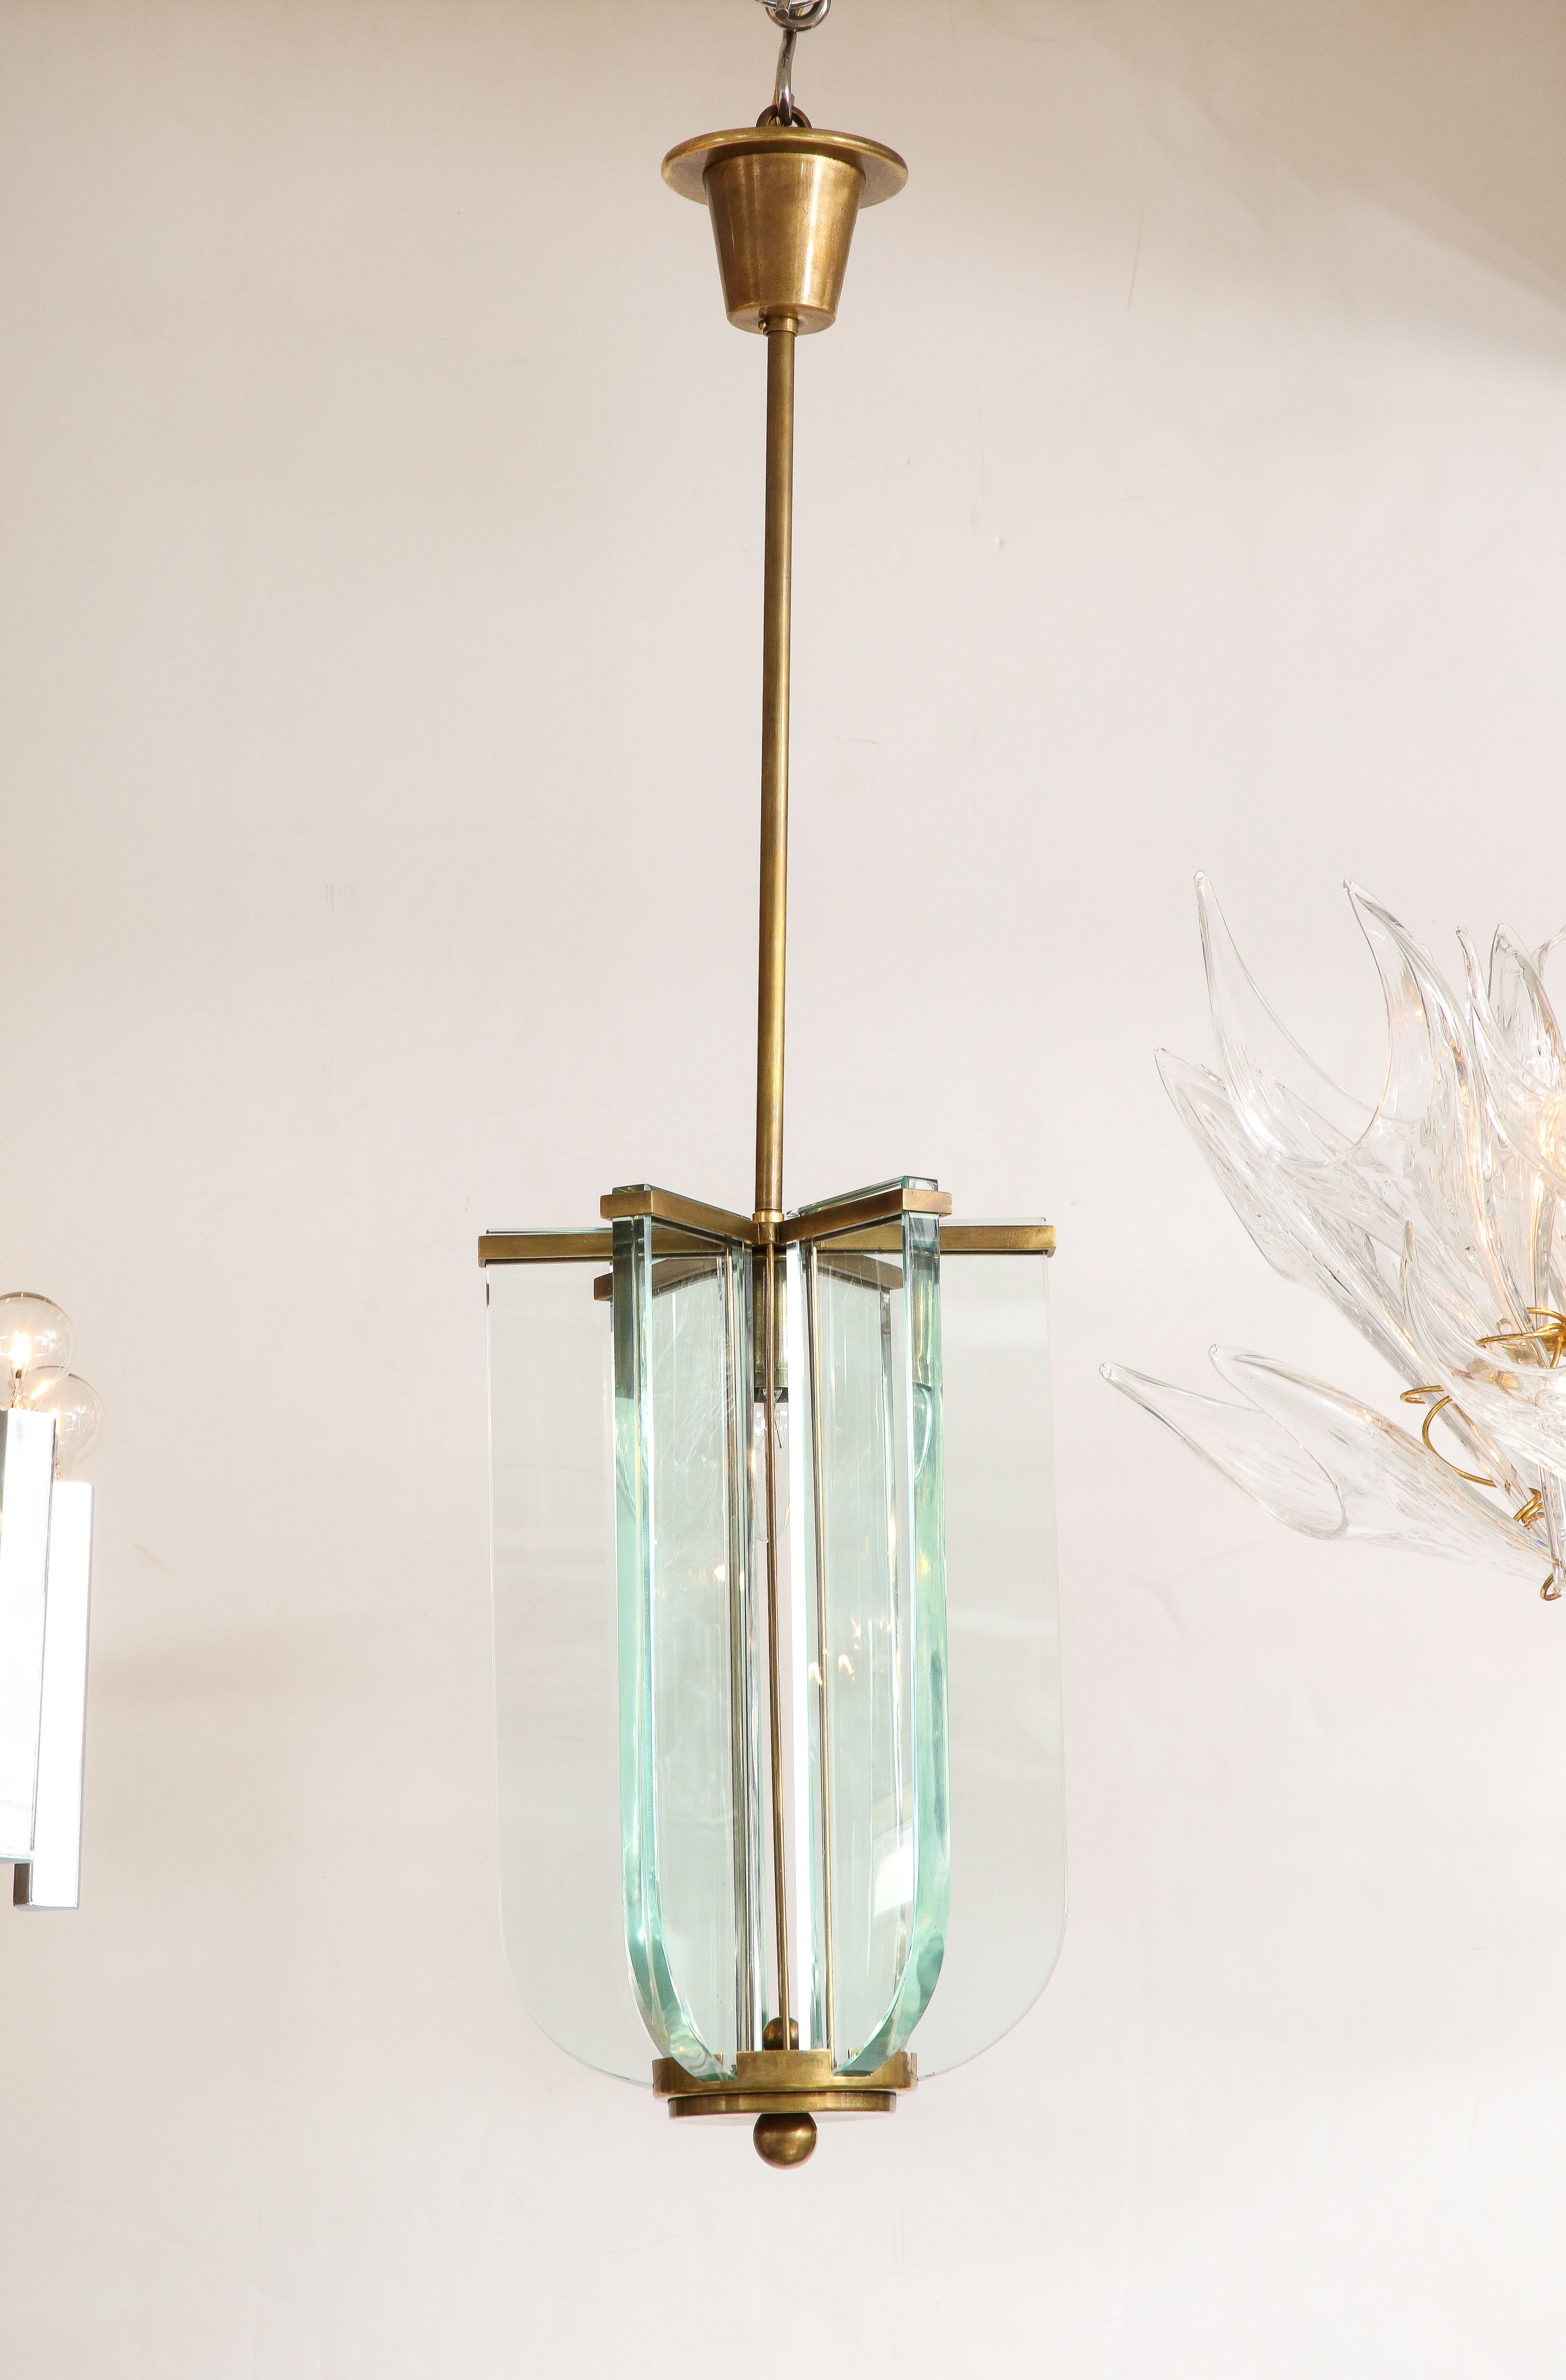 Beautiful 1950's solid brass and glass Italian pendant attributed to Fontana Arte, in vintage condition with minor wear and patina due to age and use, newly rewired and ready to use. 